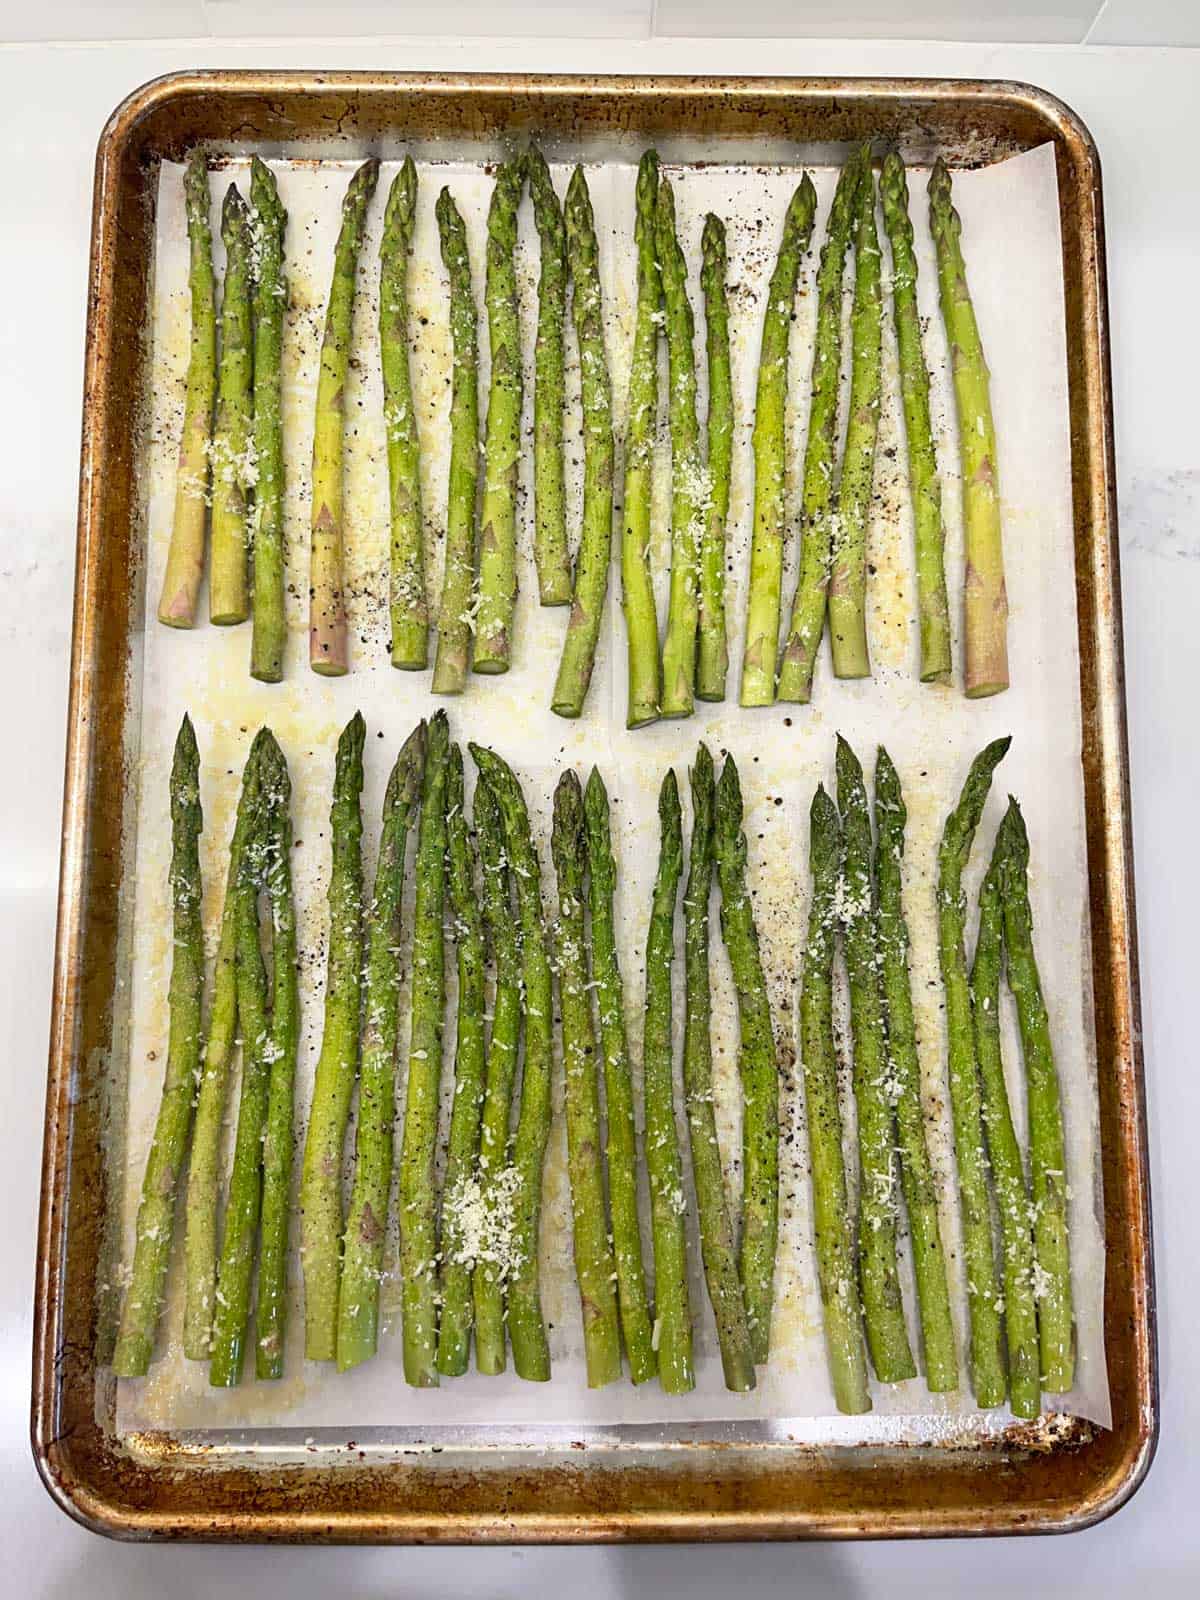 Sprinkling the asparagus with spices and parmesan.